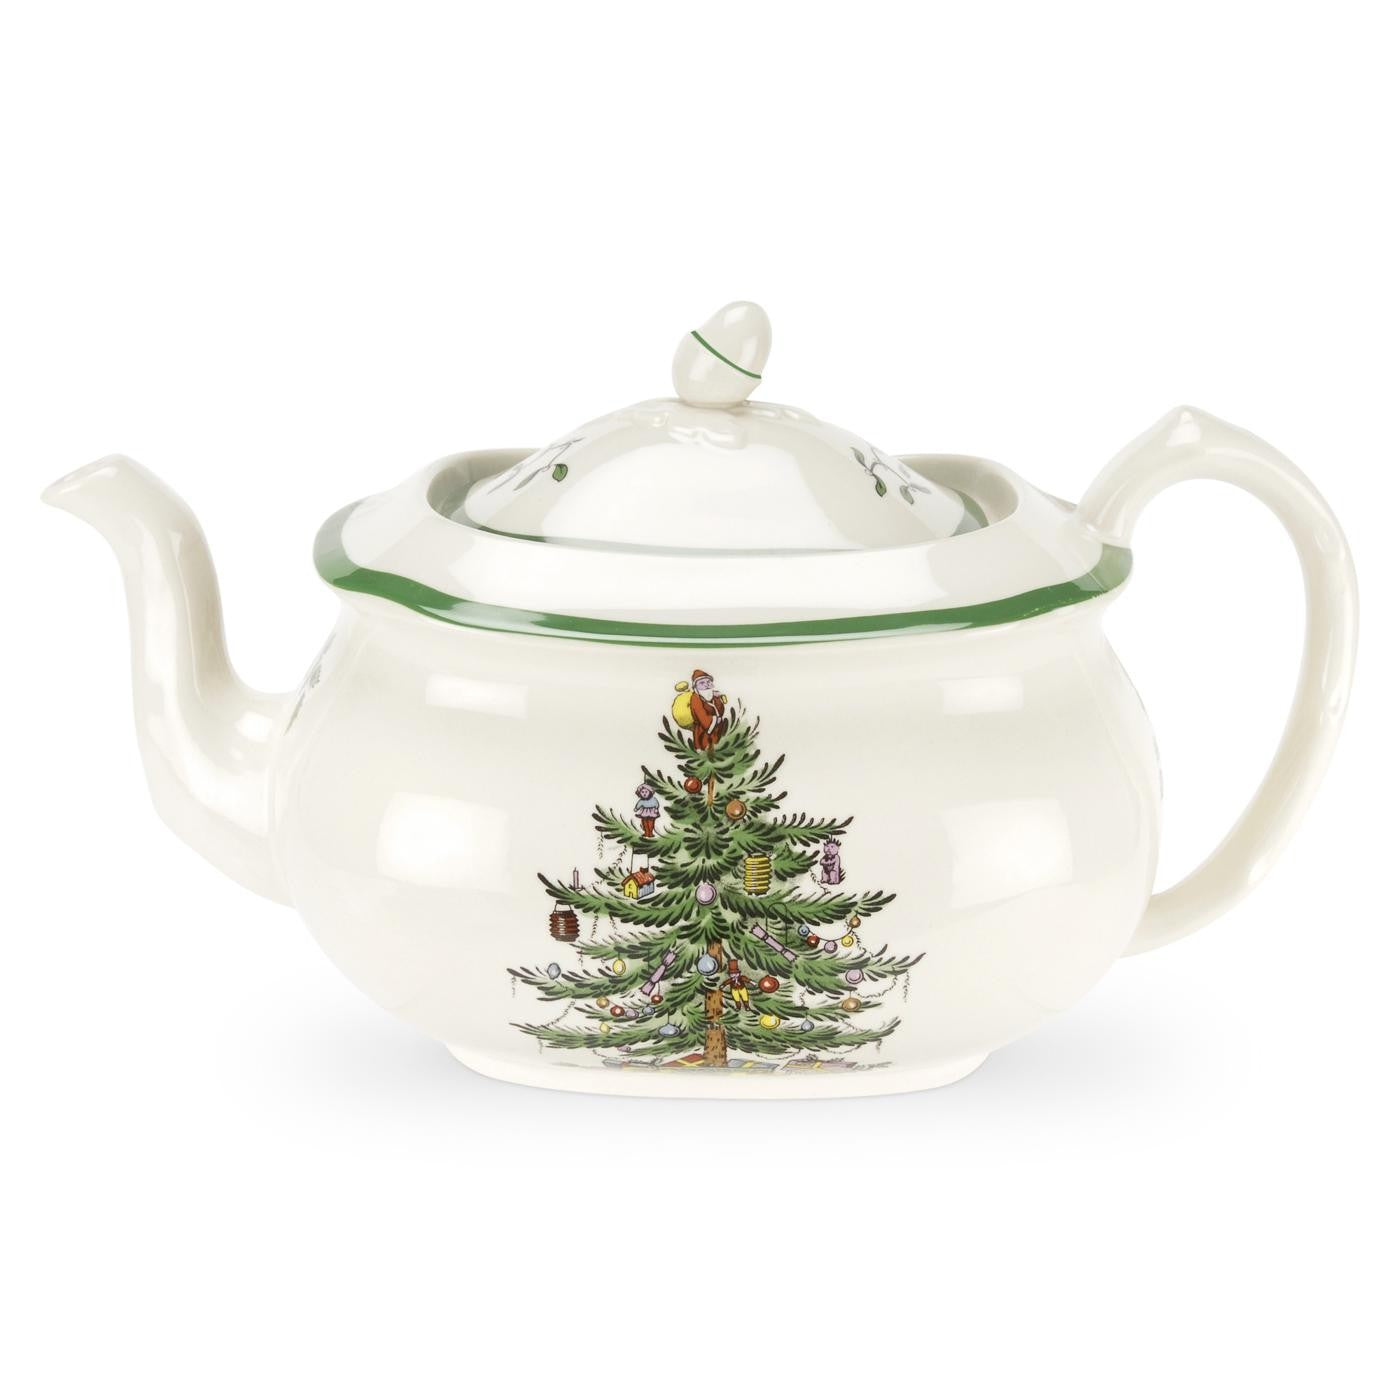 Spode Christmas Tree Teapot 1.28ltr SinclairsCollectables